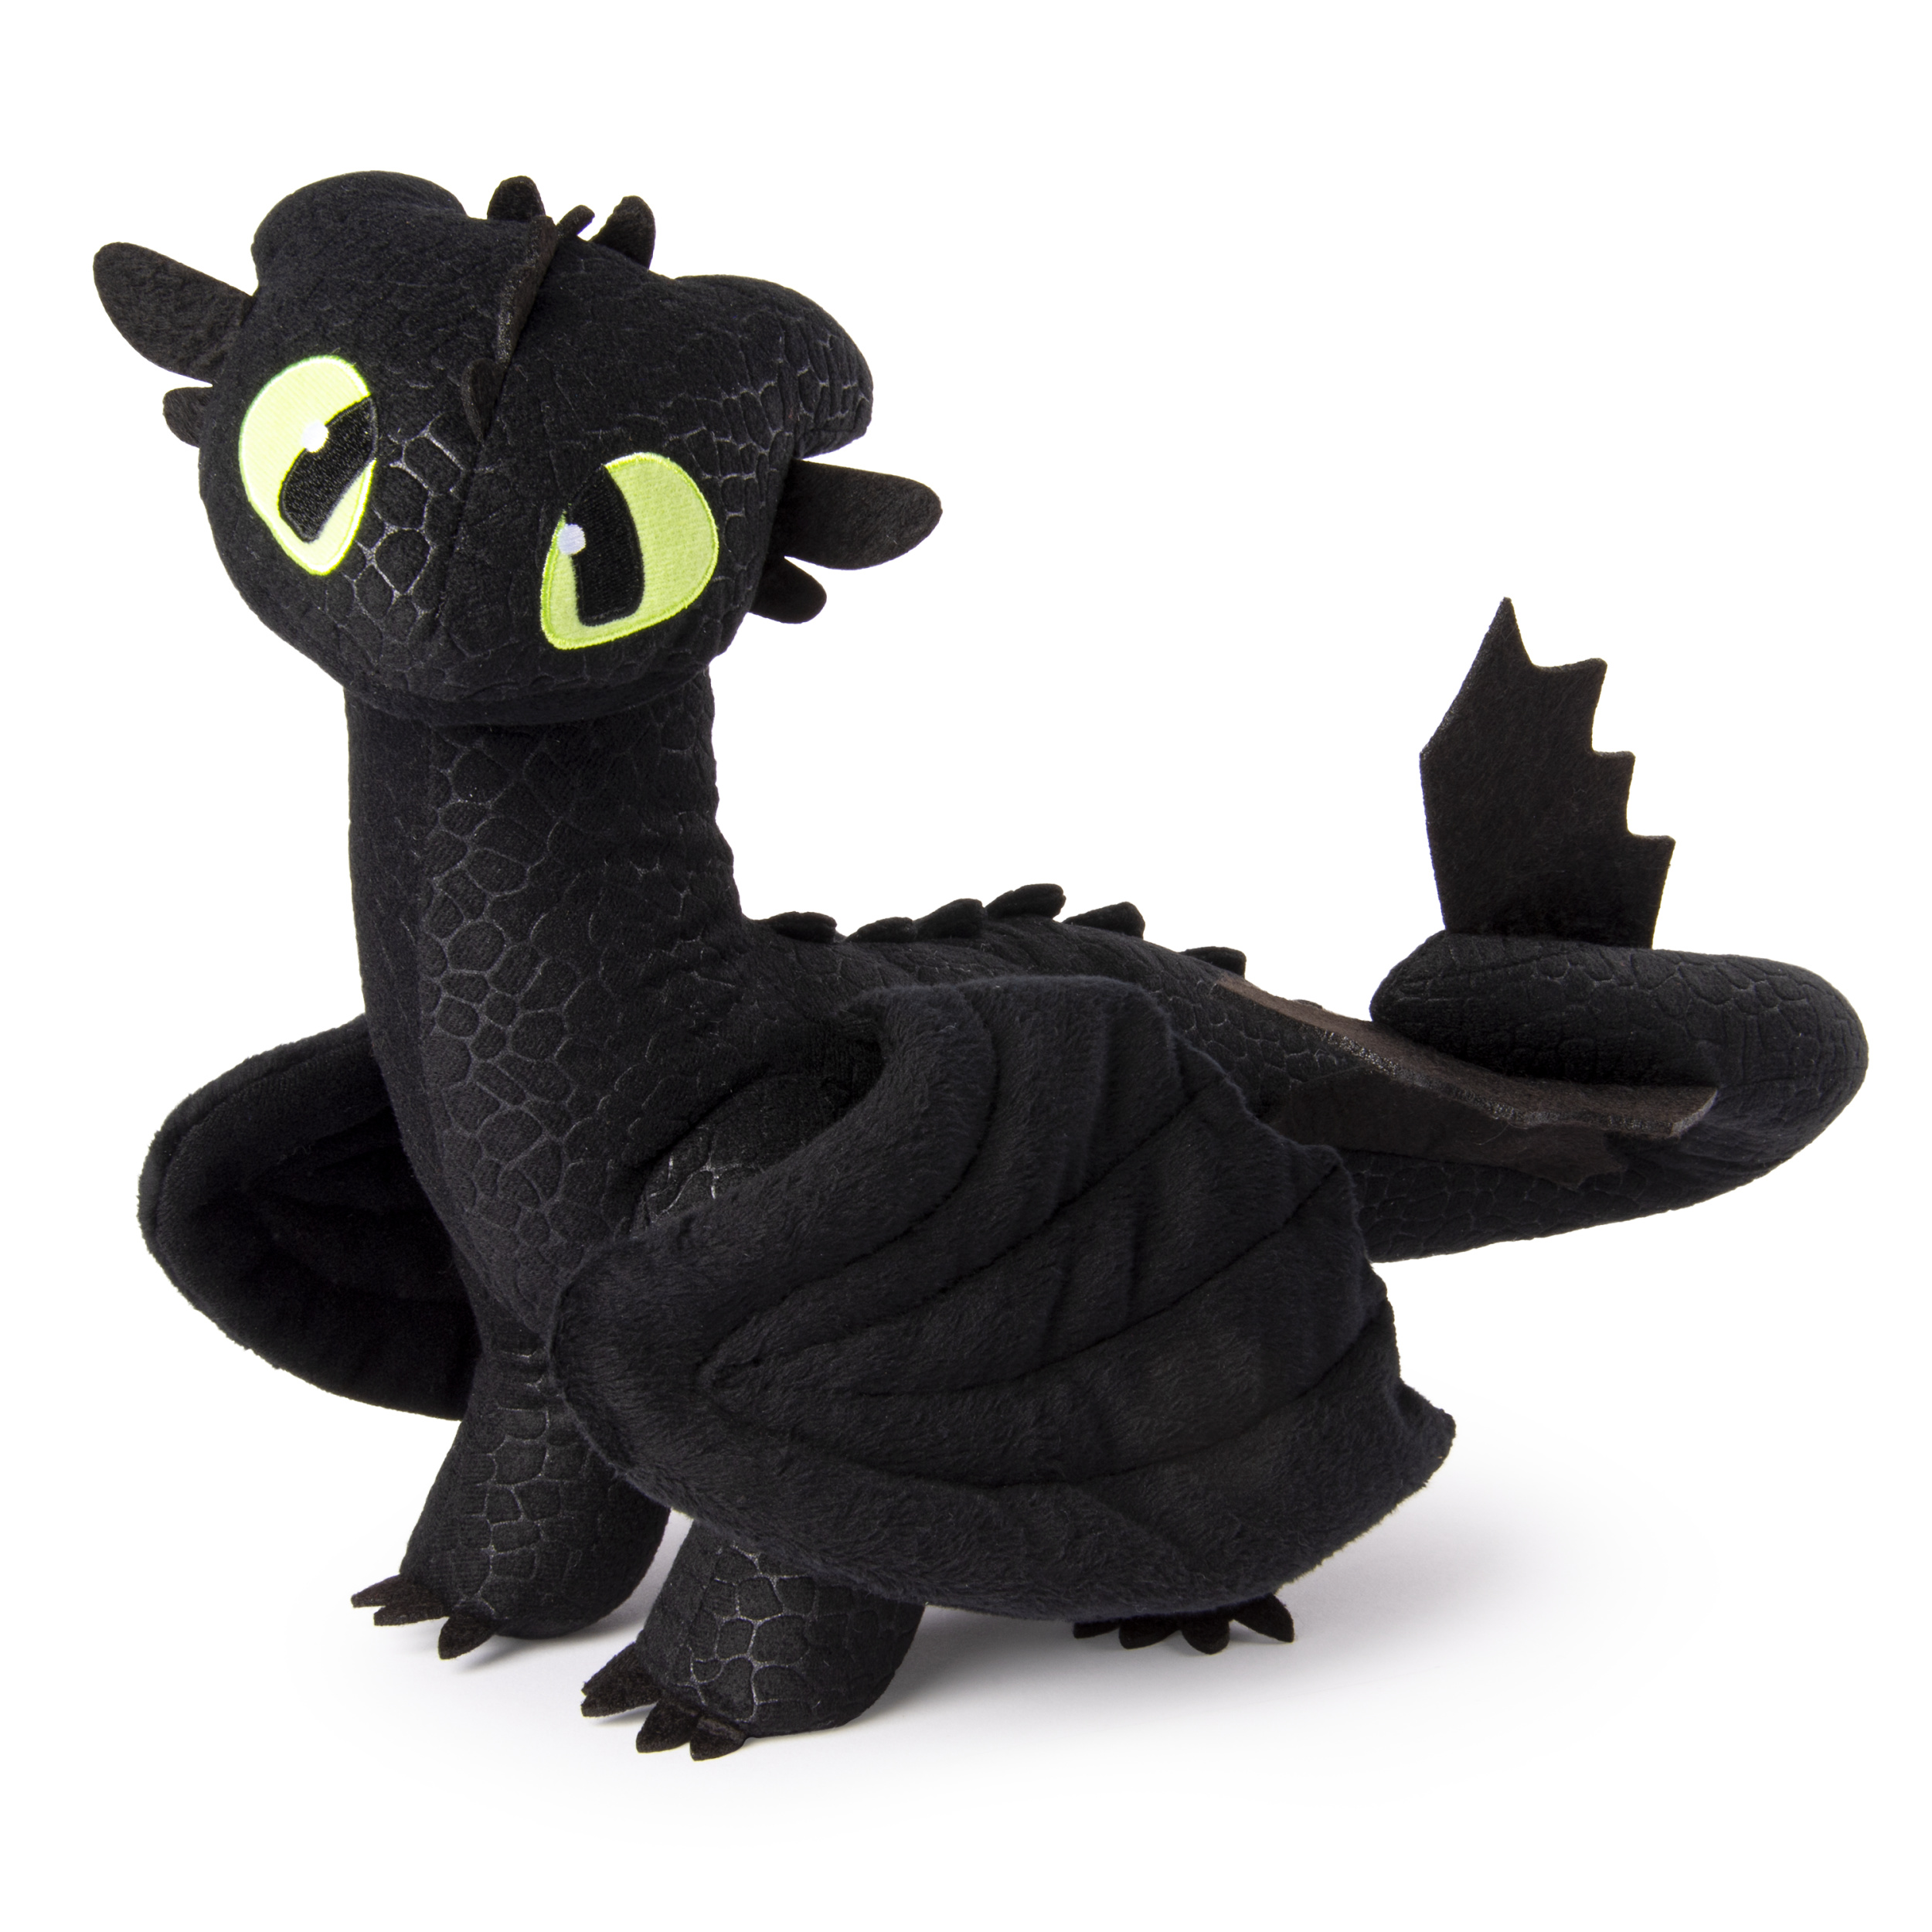 DreamWorks Dragons, Toothless 14-inch Deluxe Plush Dragon, for Kids Aged 4 and up - image 2 of 3